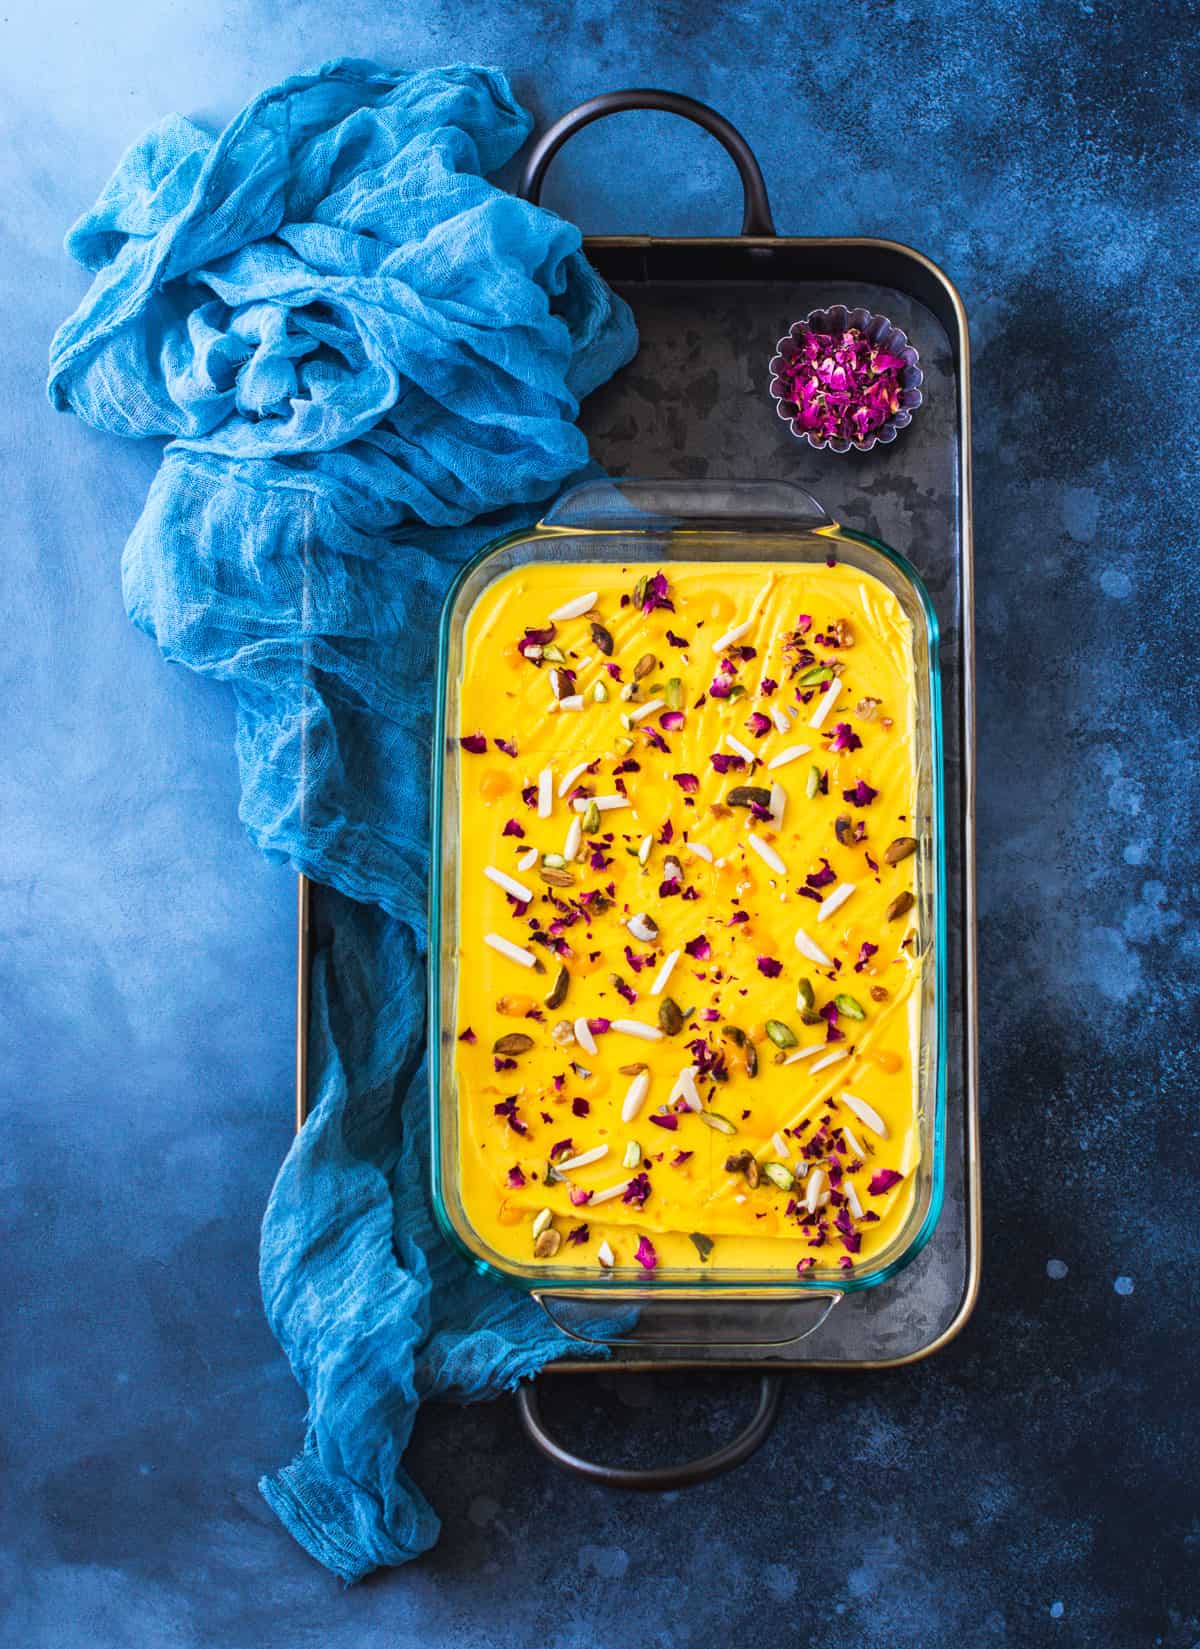 Mango Panna COtta served in a tray with blue cloth on the side